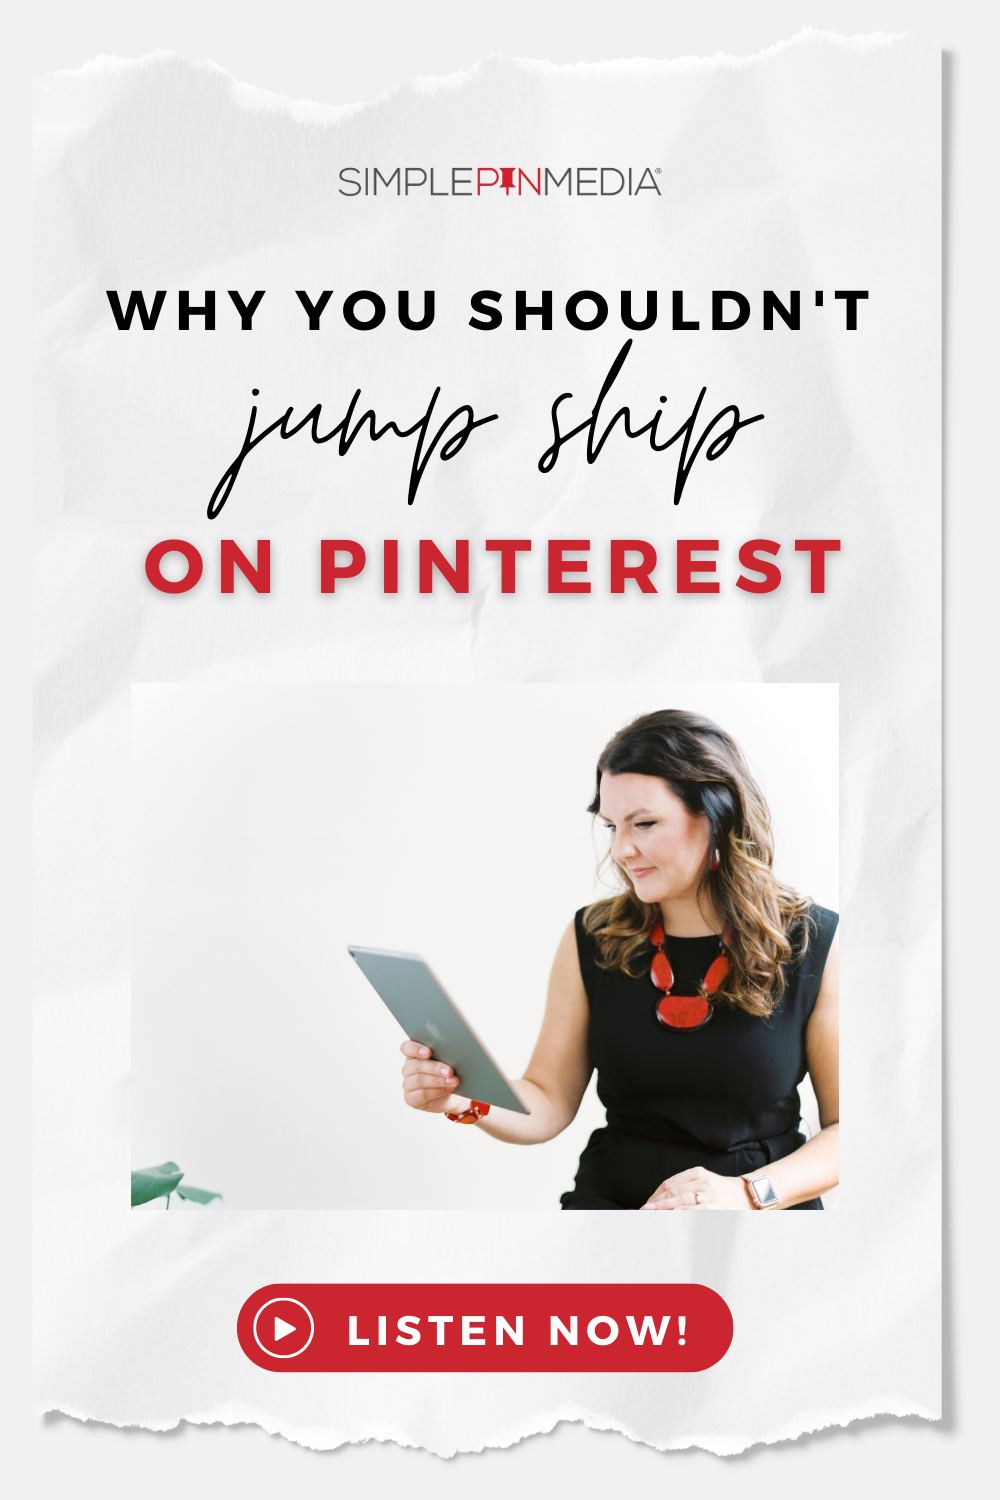 321 – Why Pinterest in 2023?